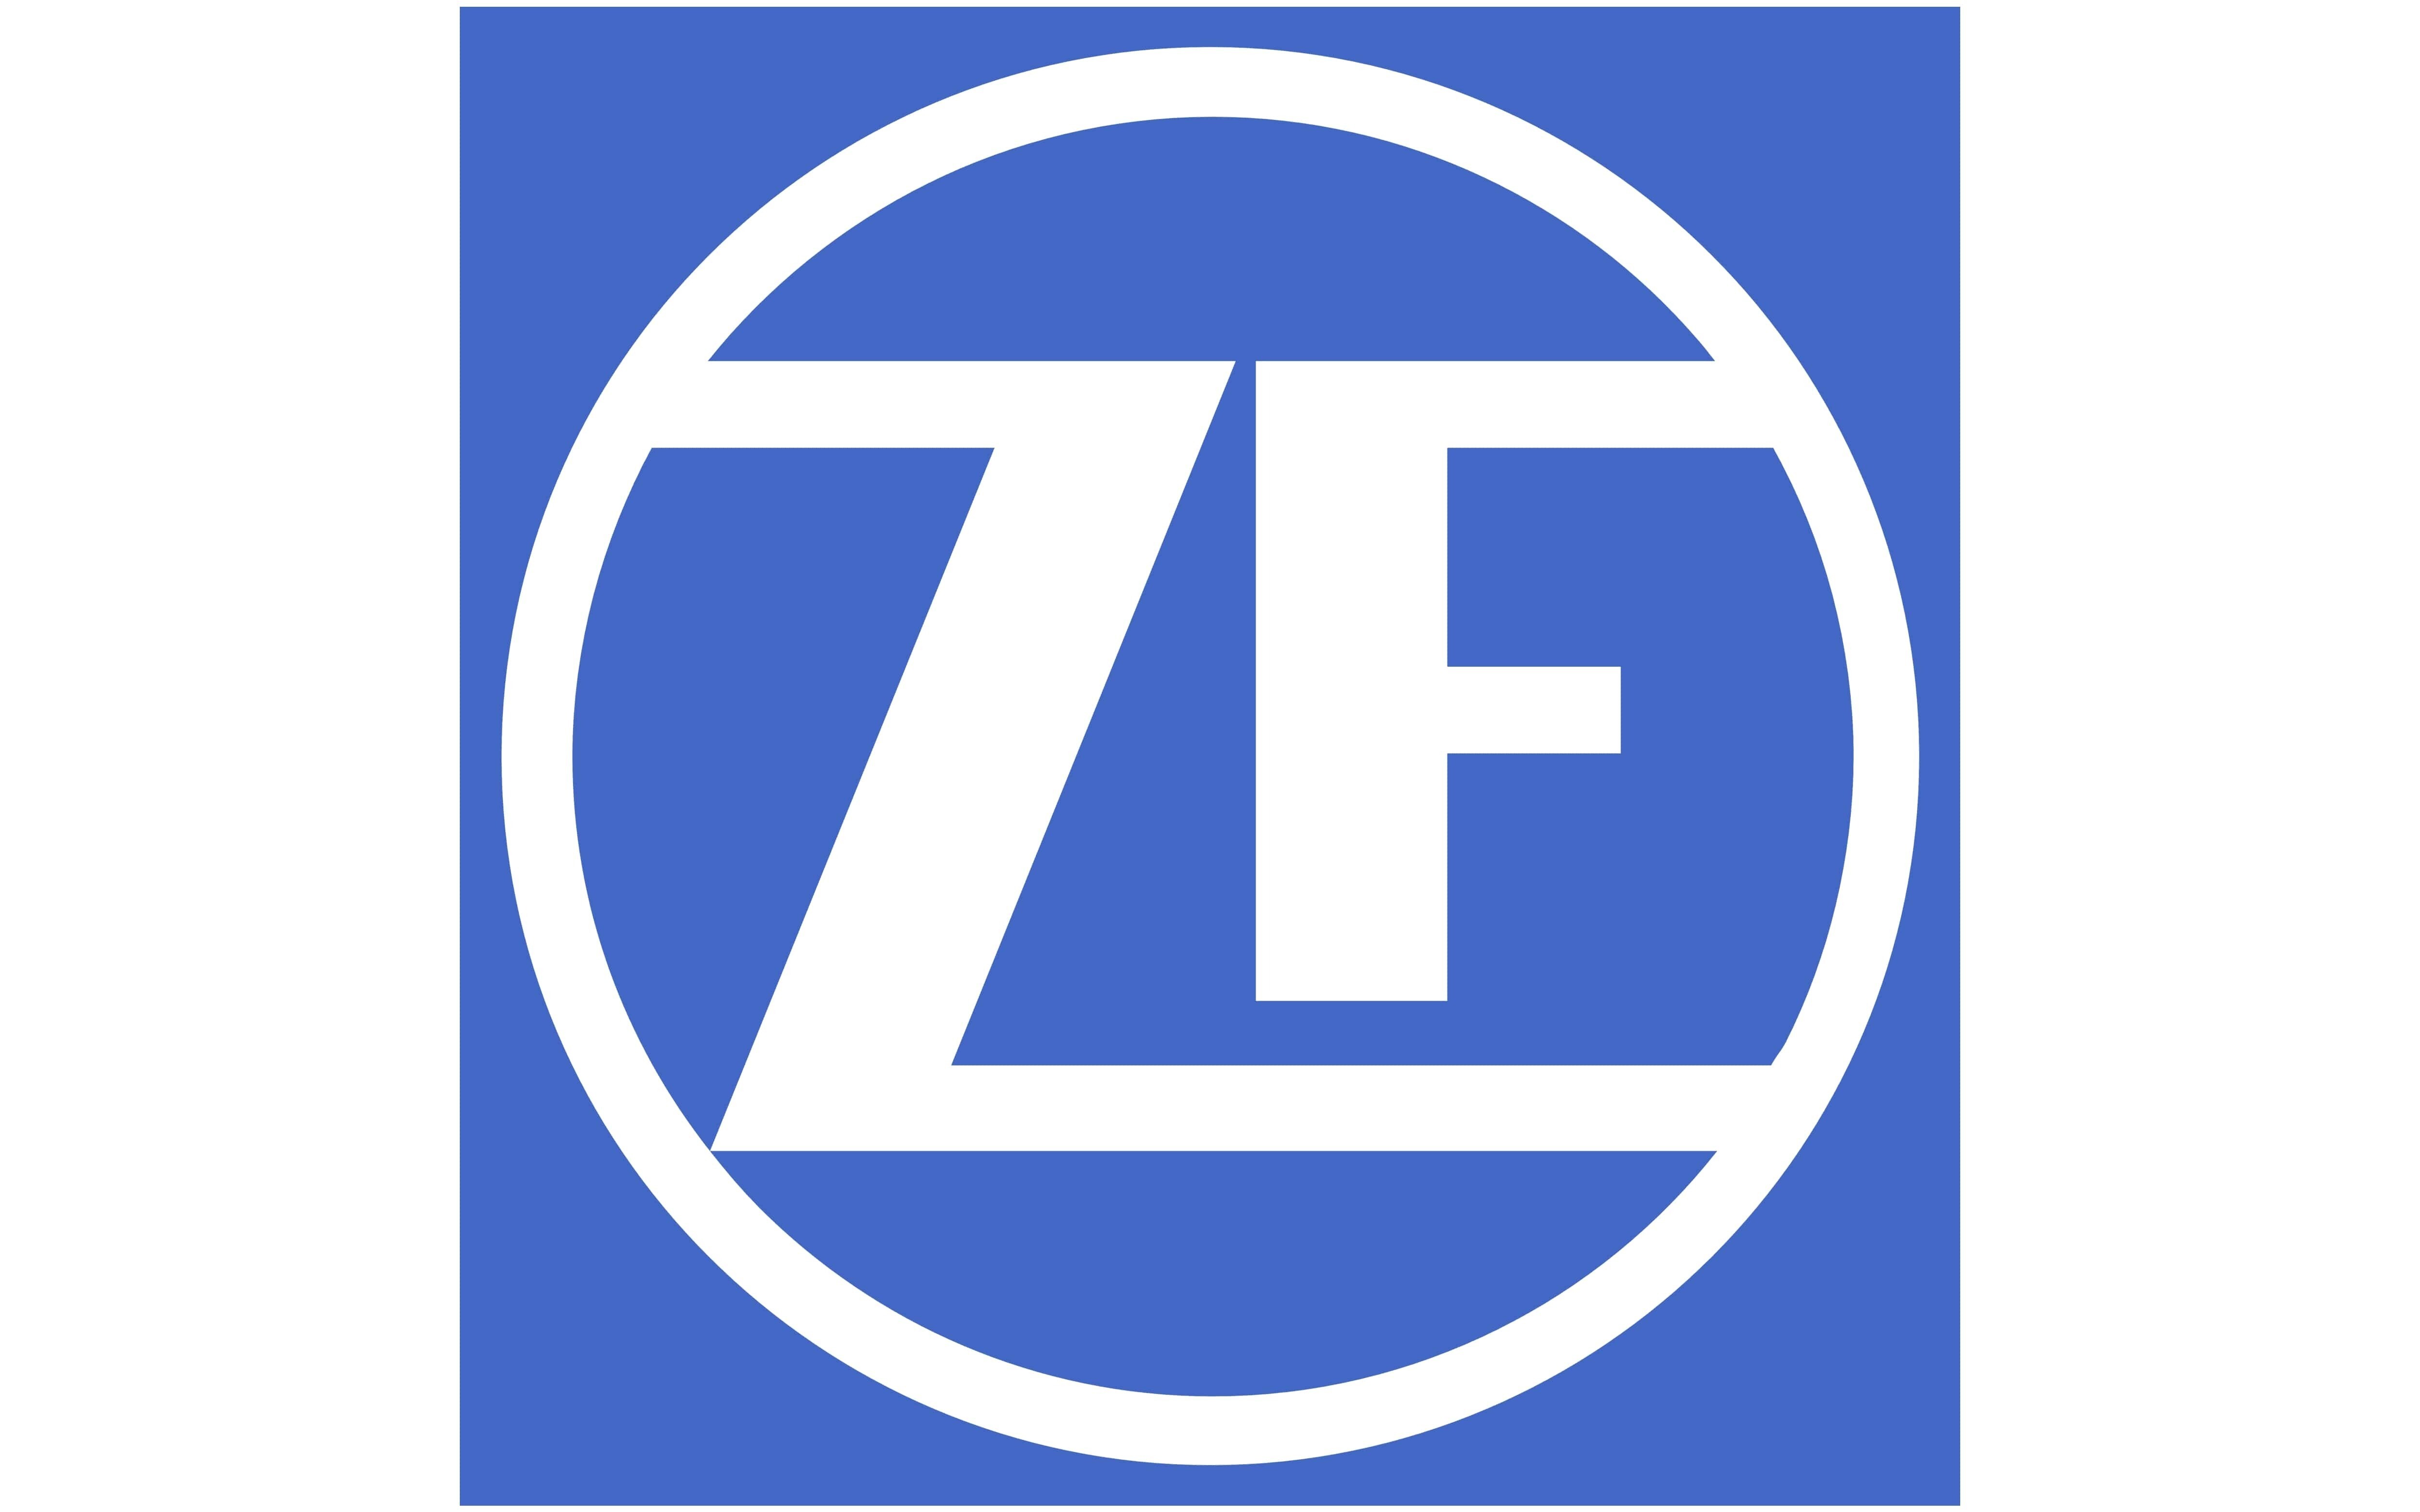 Meilixin Technology and ZF Friedrichshafen AG forge strategic alliance for technological advancement